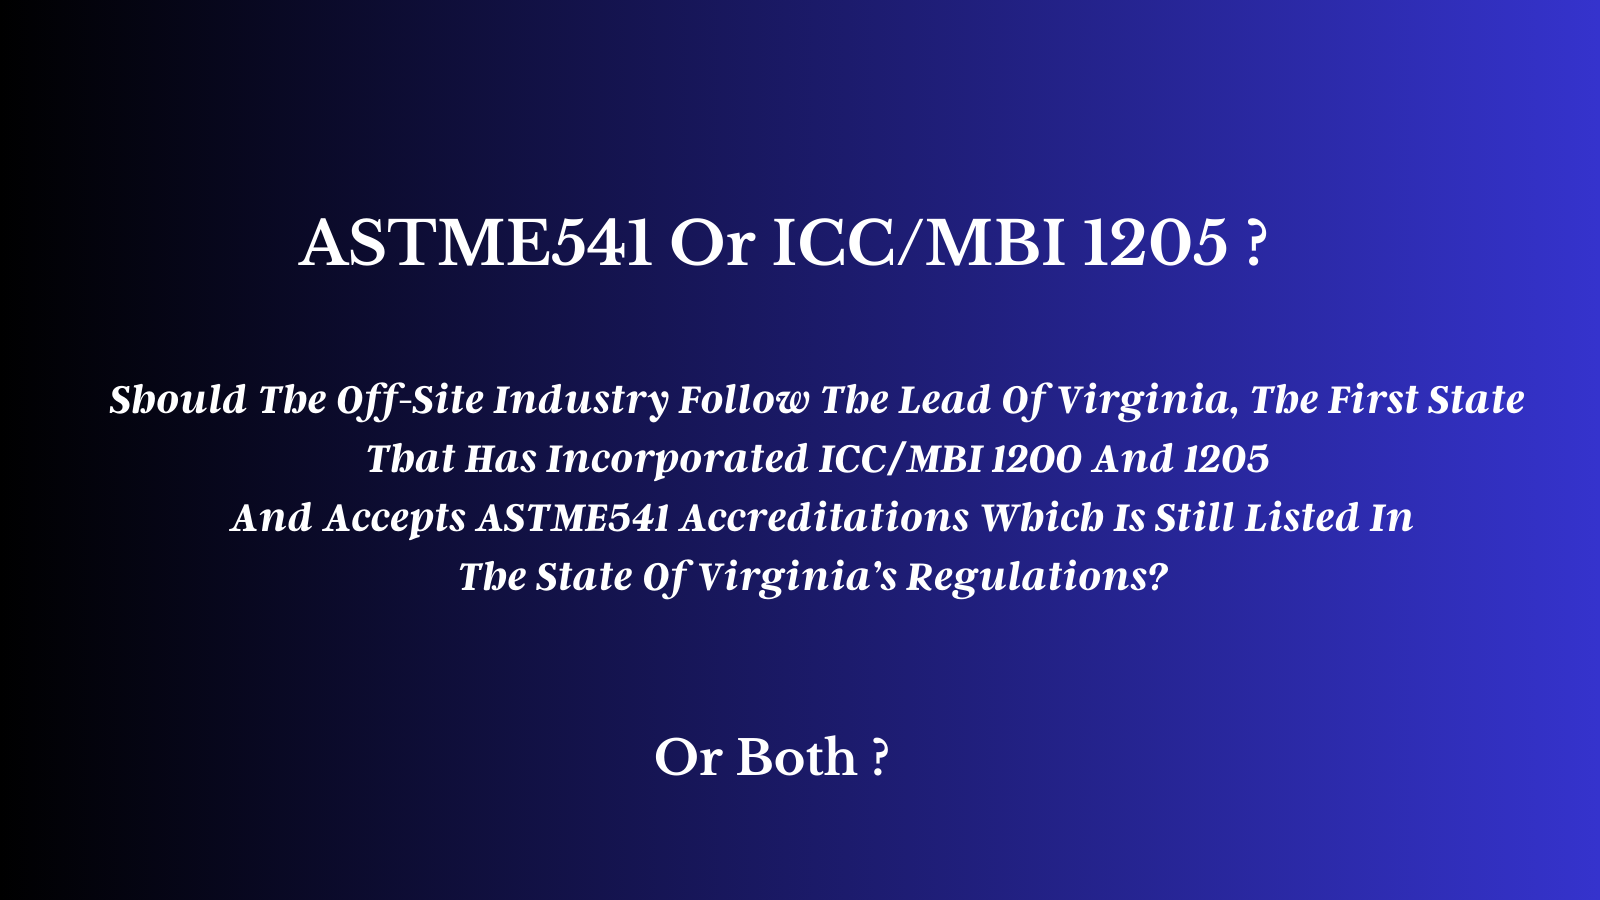 ASTME541 Or ICC/MBI 1205?